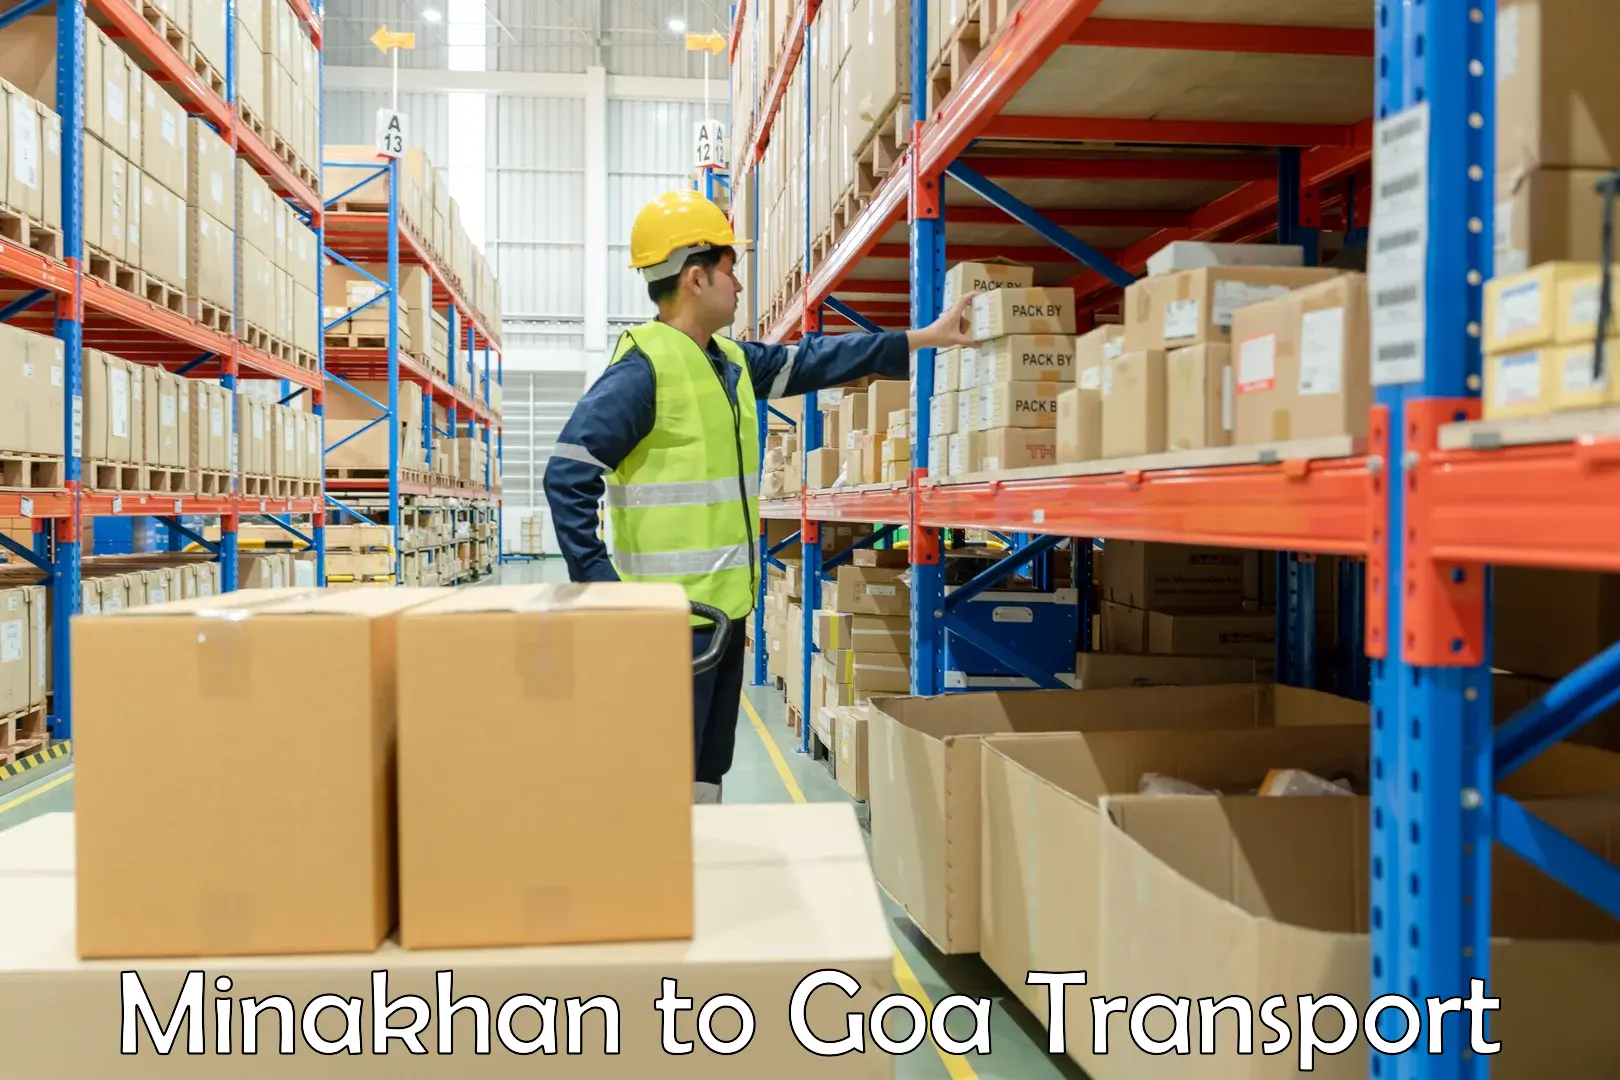 Transport bike from one state to another Minakhan to Goa